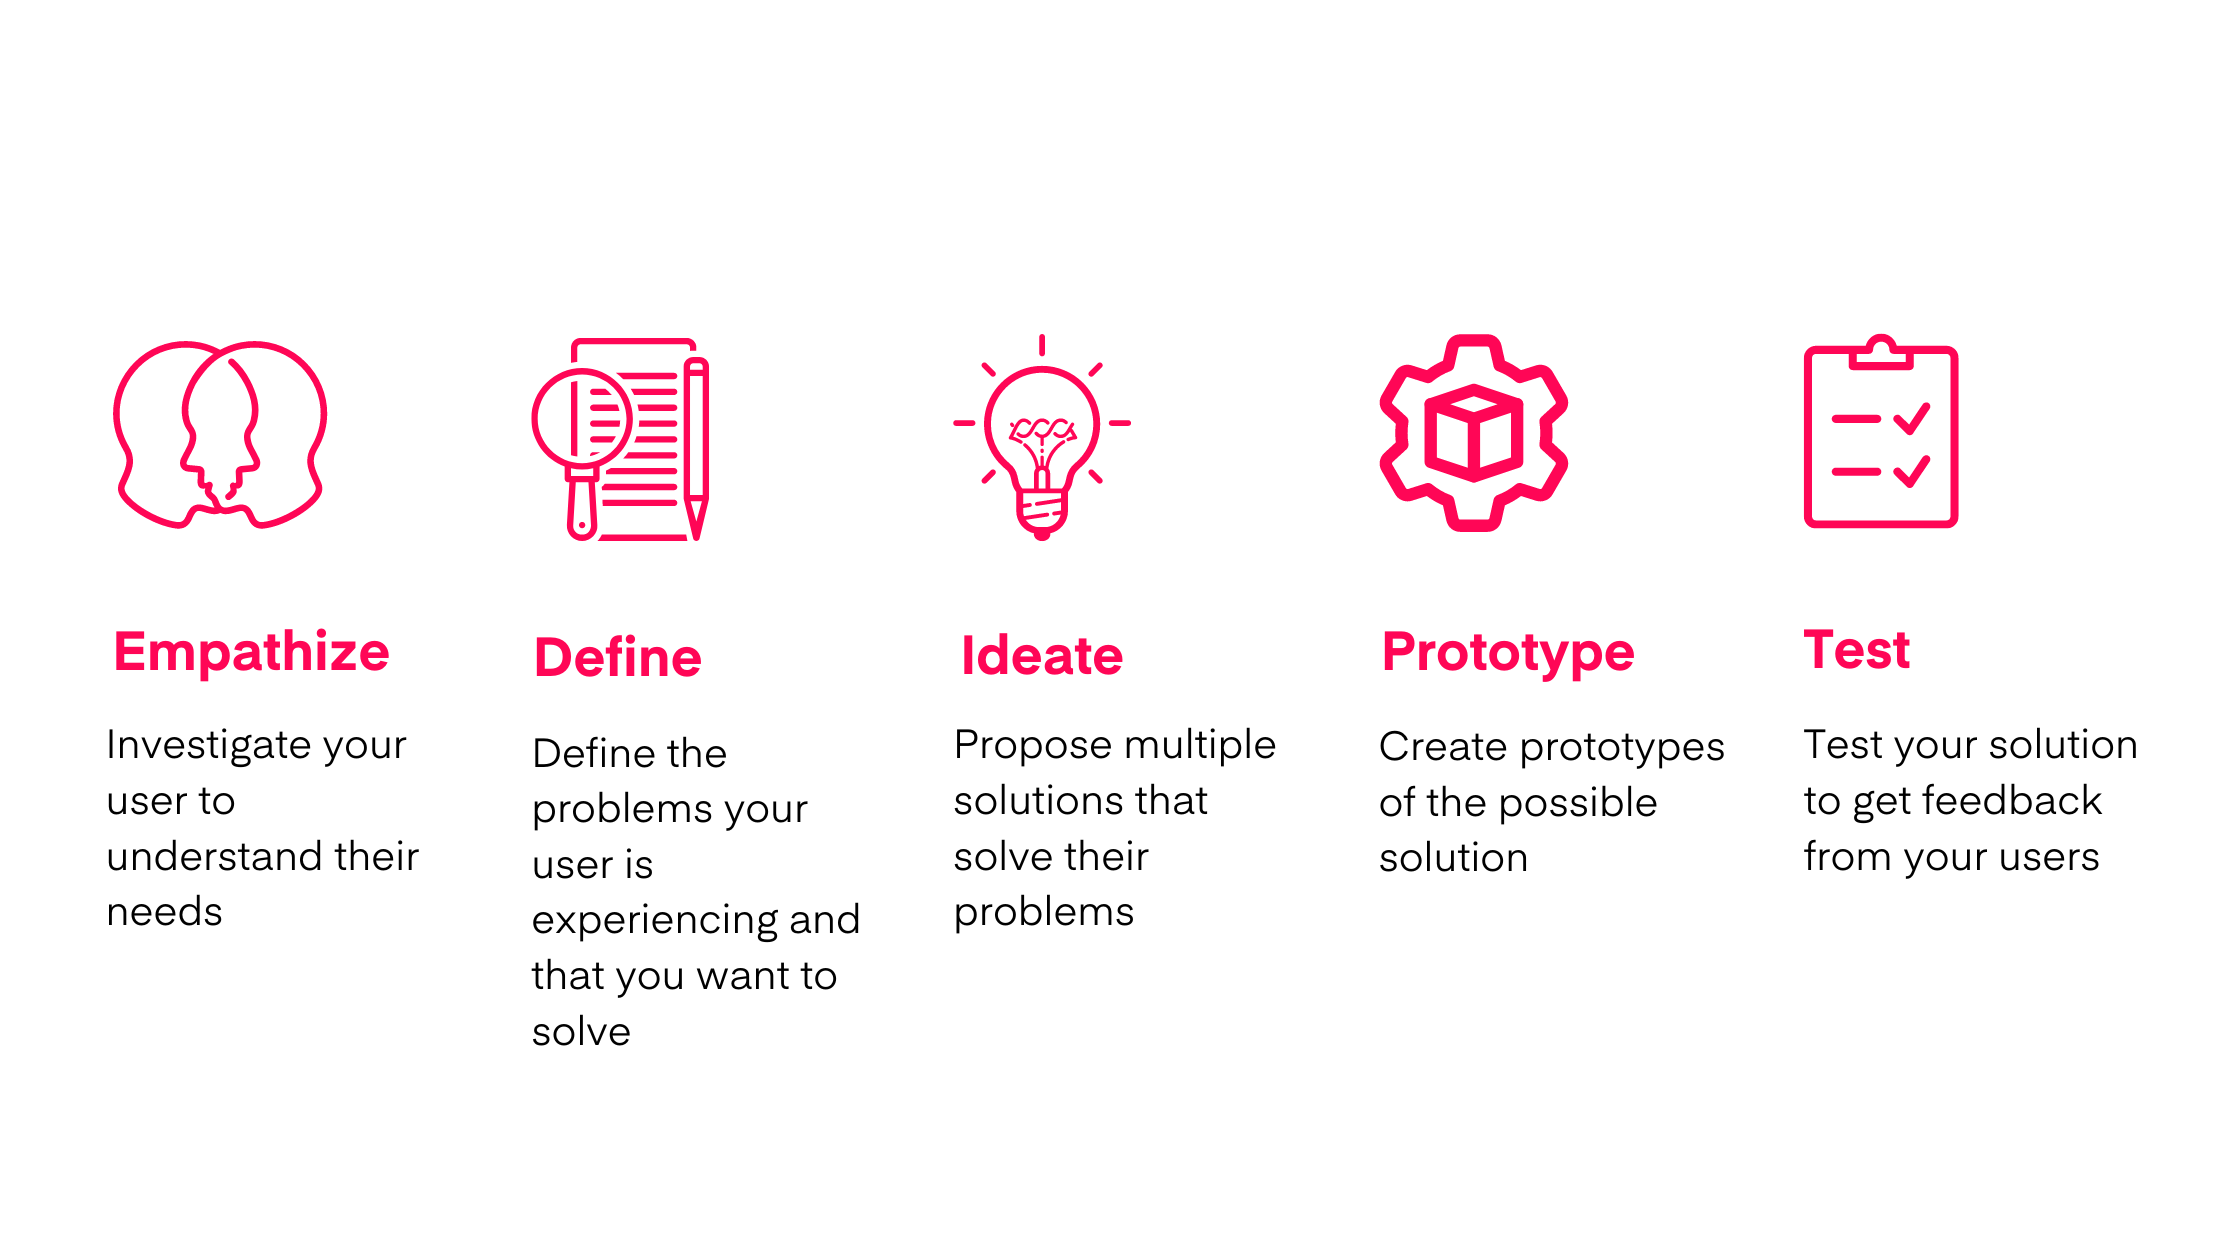 design thinking descriptions by phase